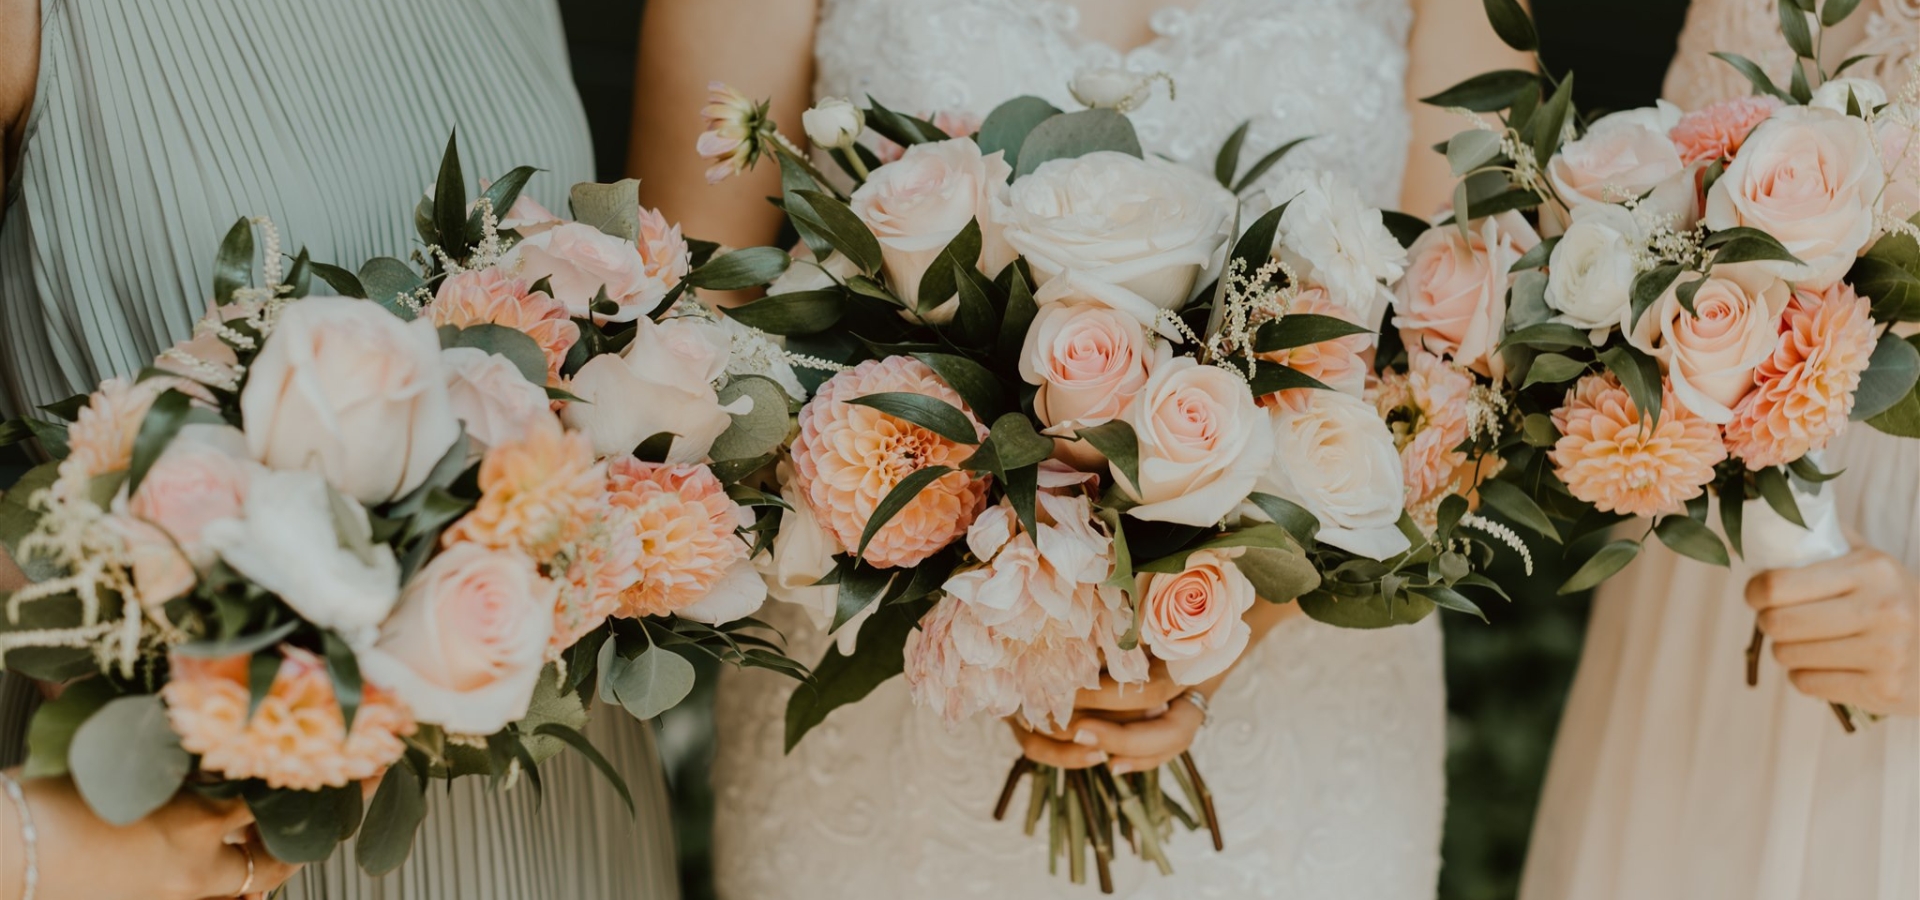 How to Preserve Your Wedding Bouquet Like a Pro